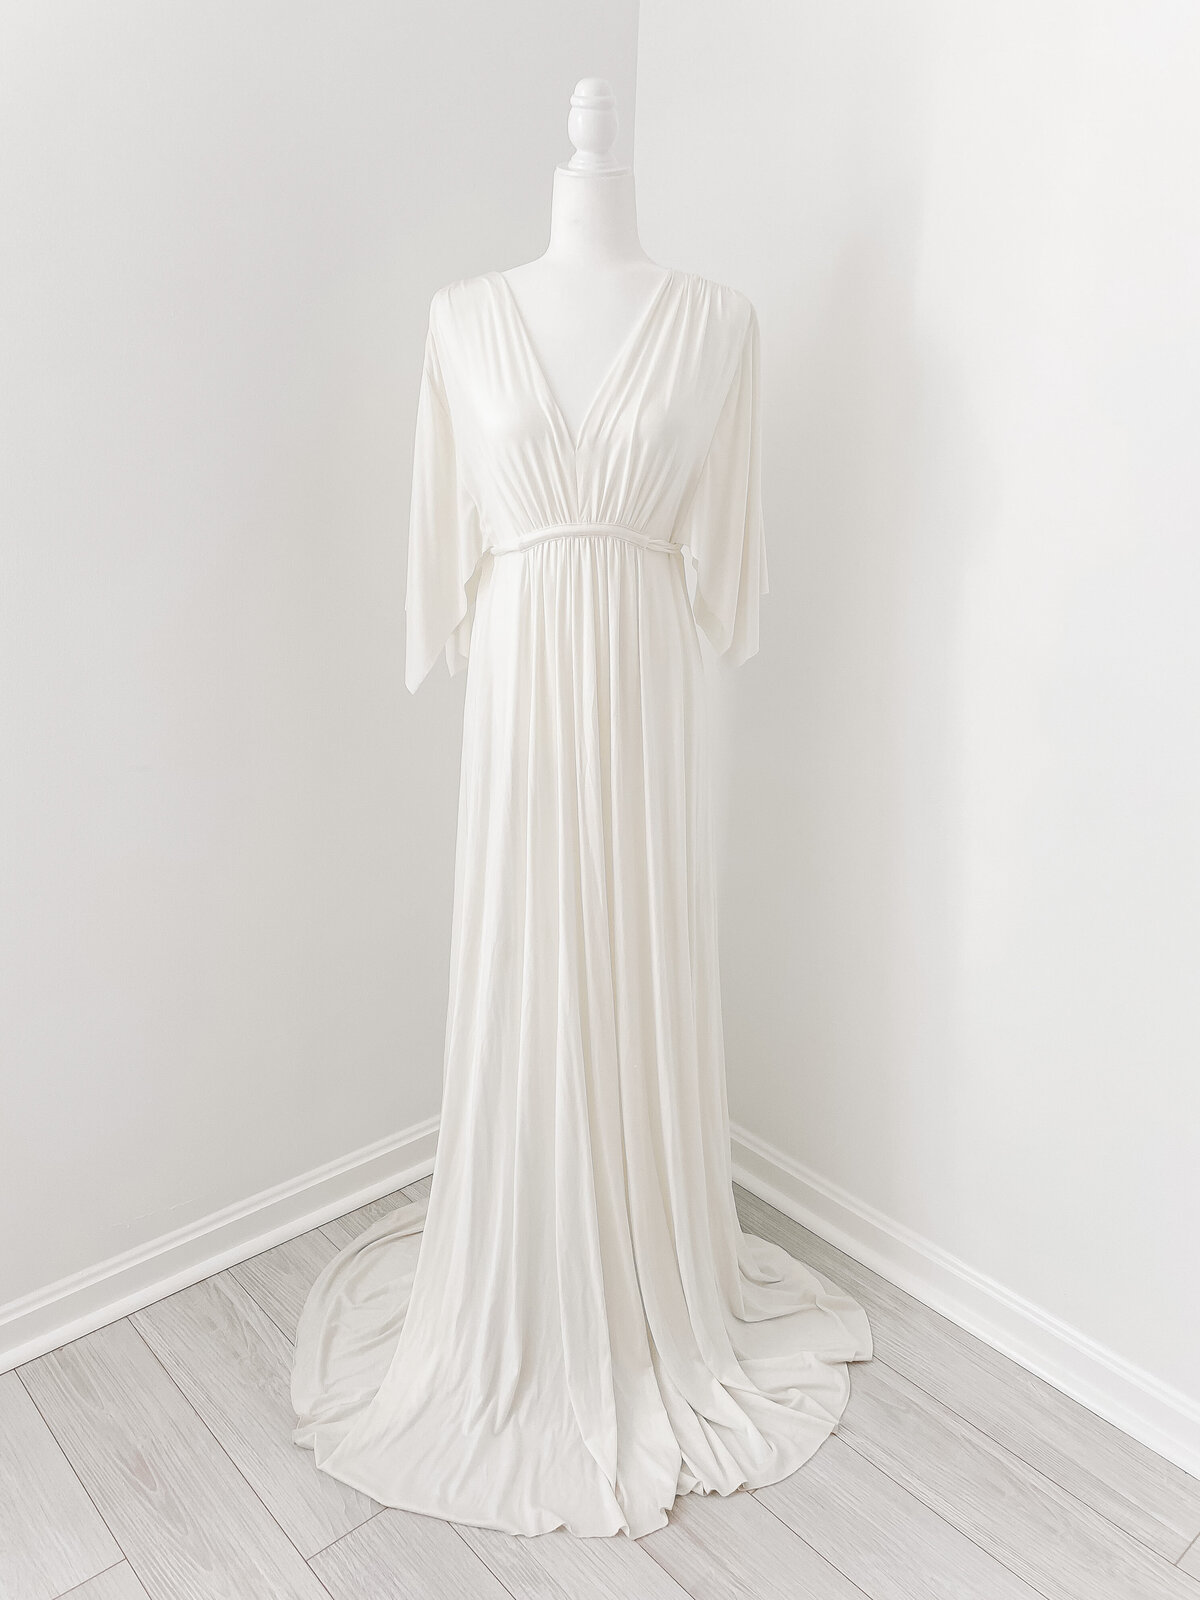 A stunning white long dress with a deep V cut to wear for your photoshoot with Northern Virginia Maternity Photographer